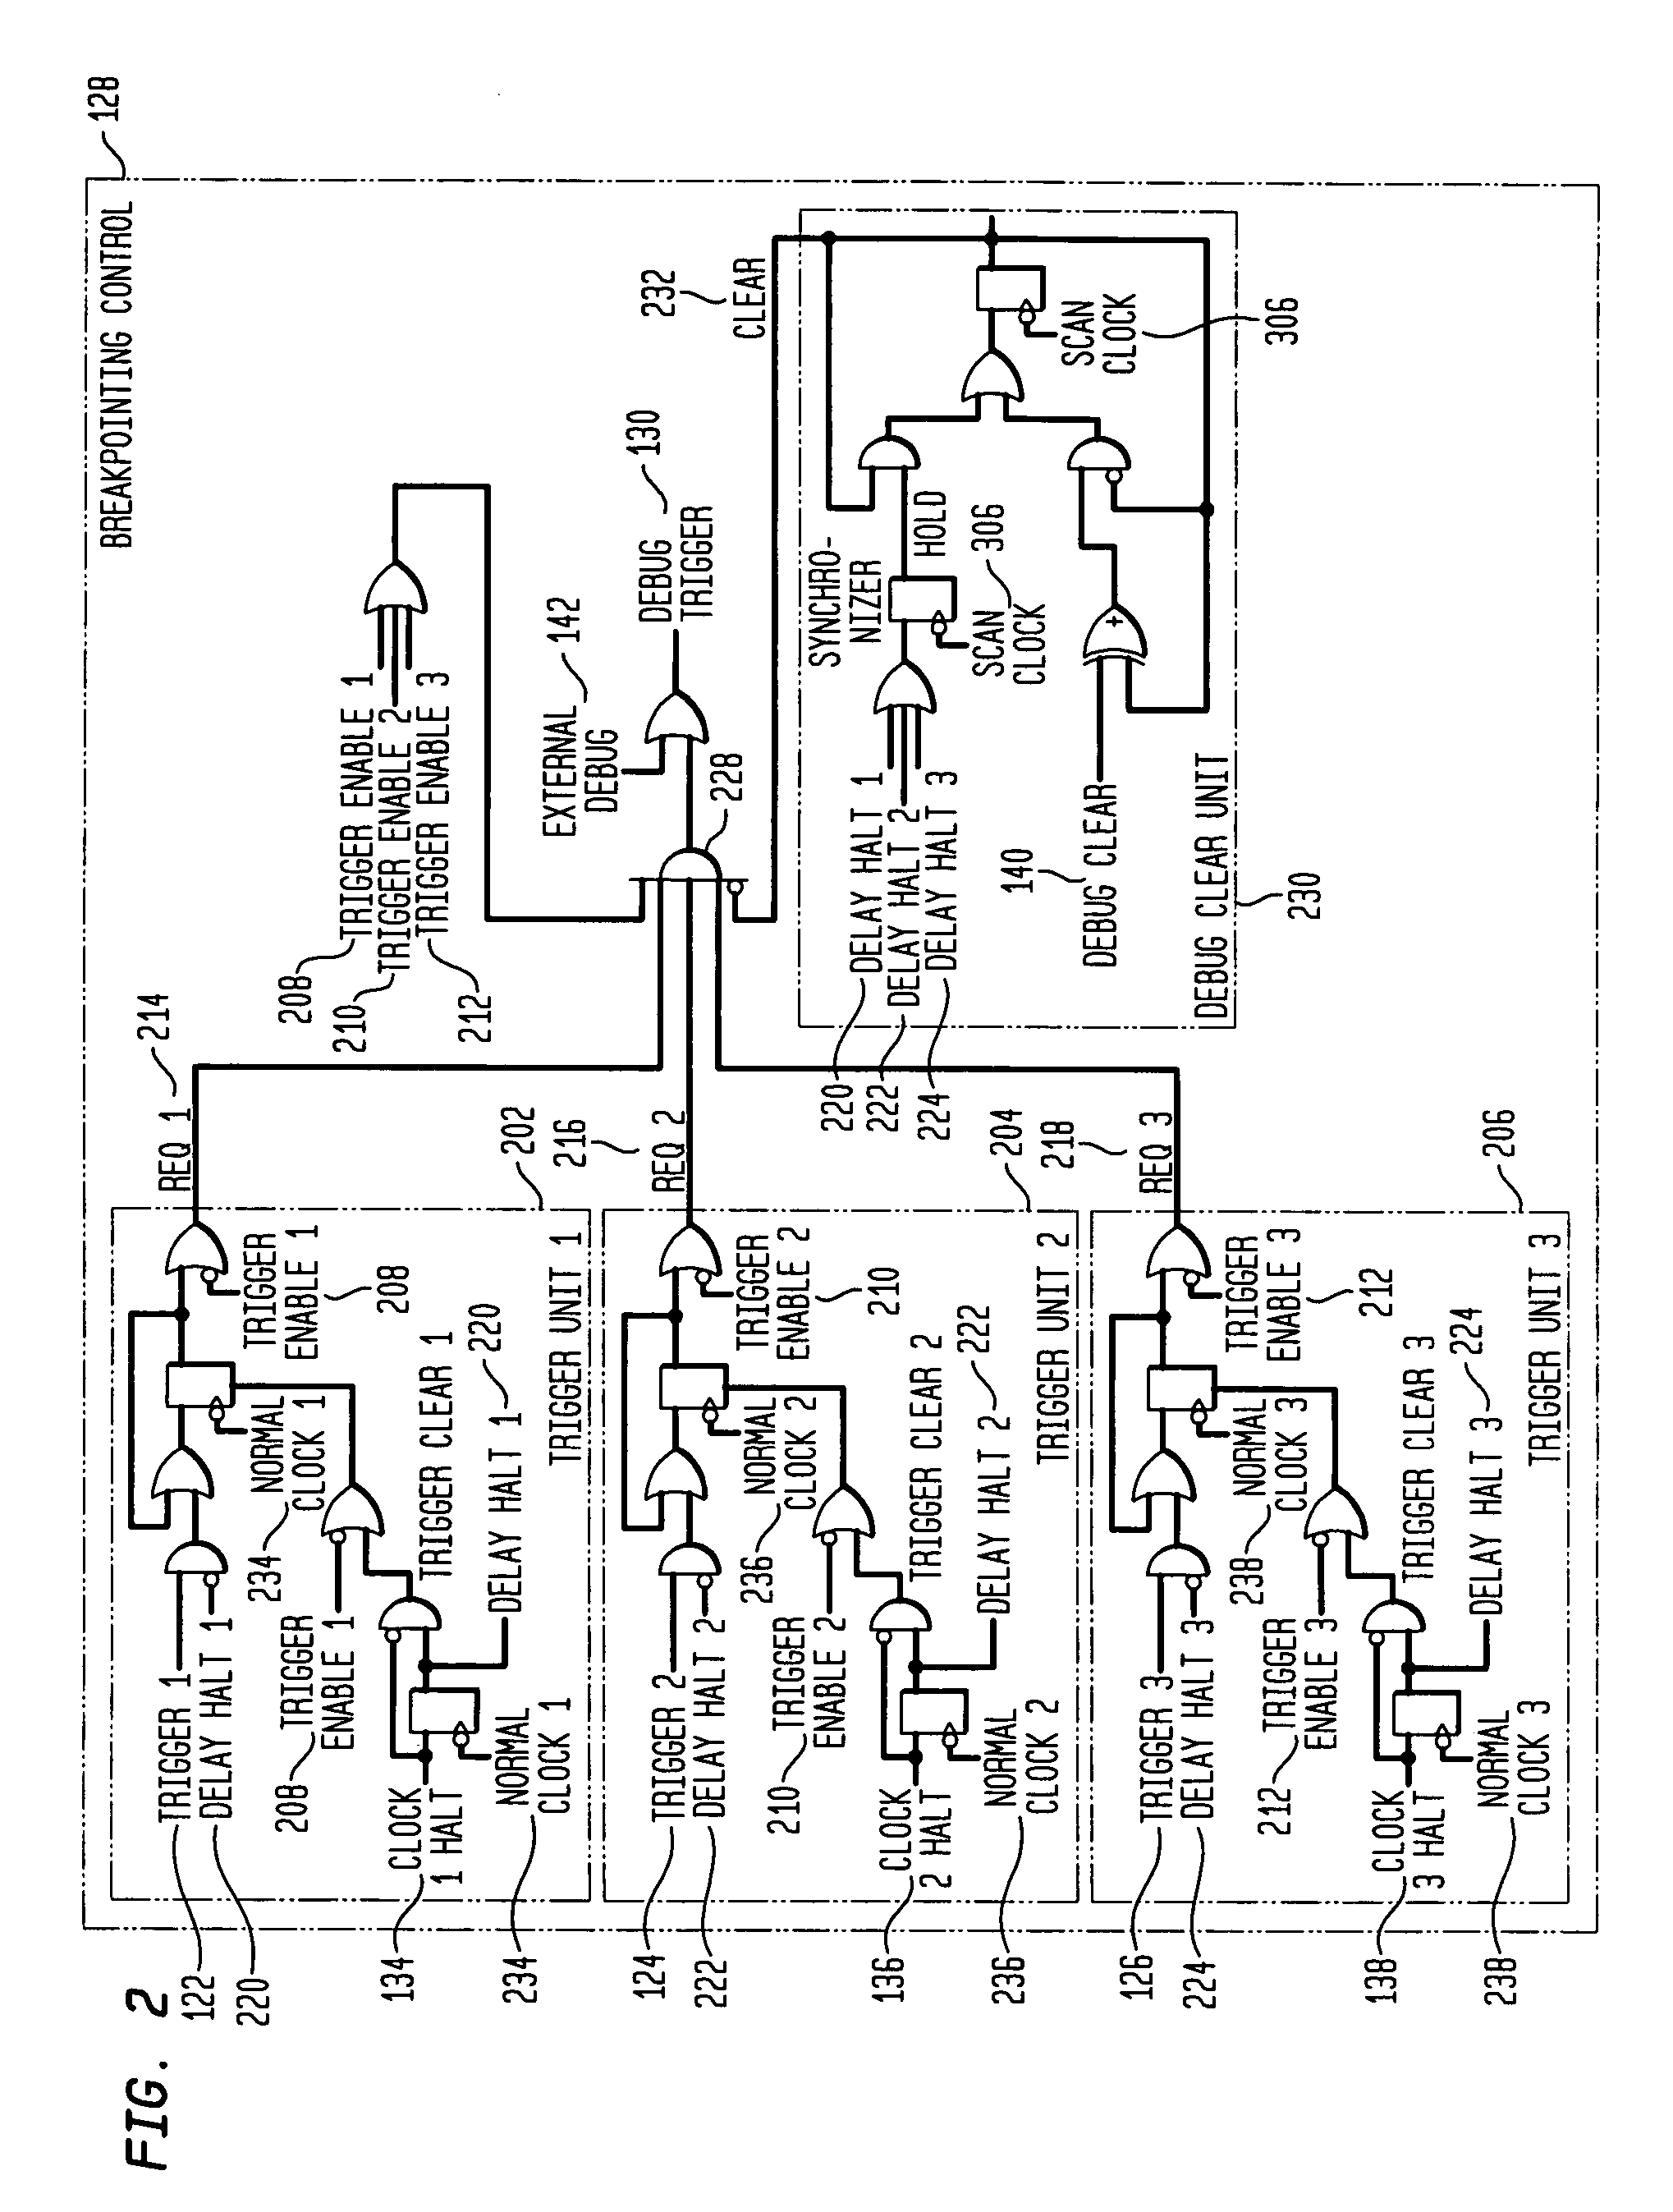 System and method for debugging system-on-chips using single or n-cycle stepping